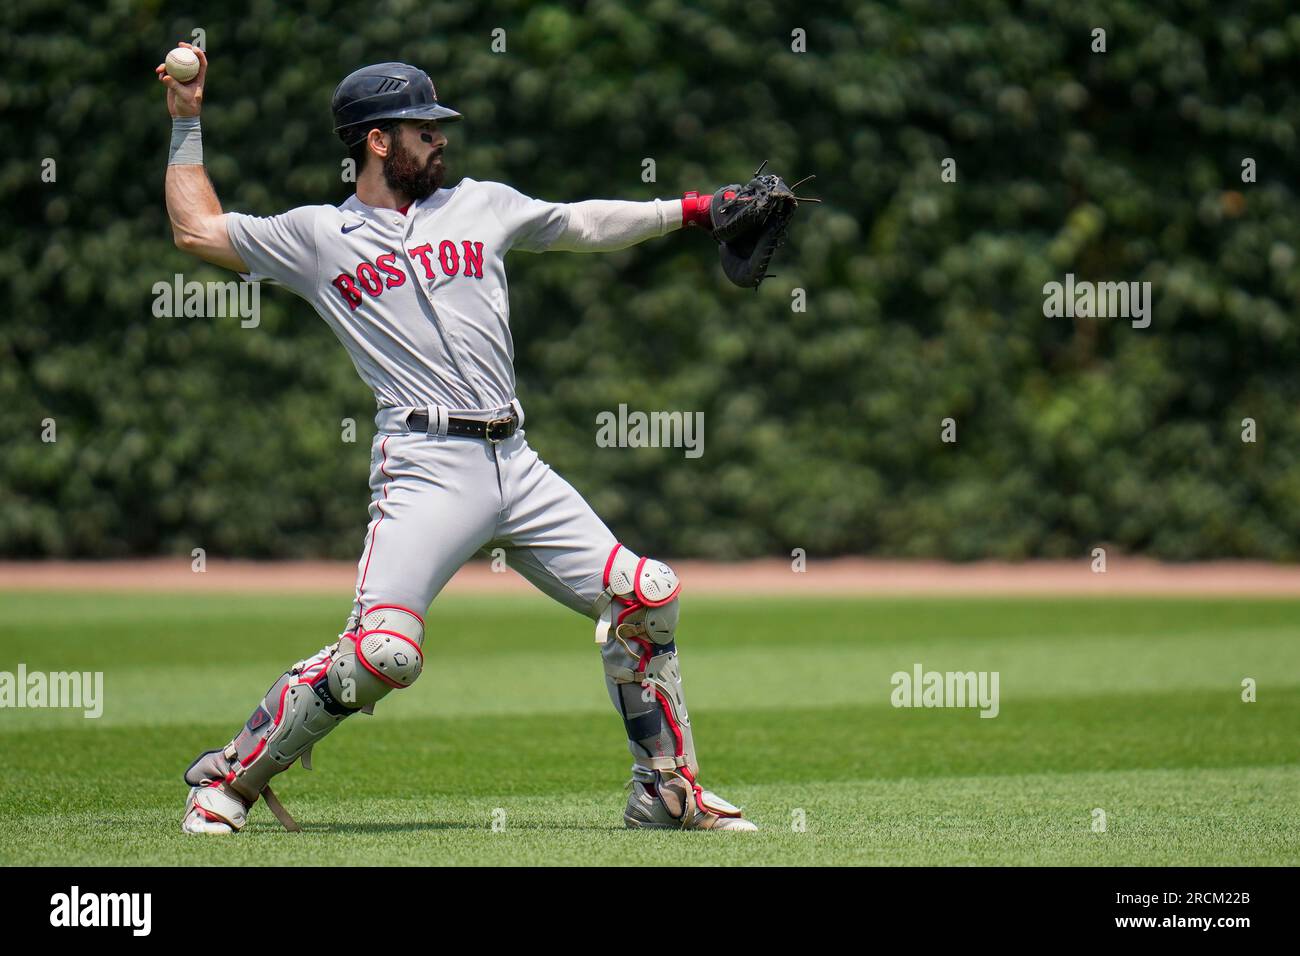 Boston Red Sox catcher Connor Wong warms up before a baseball game